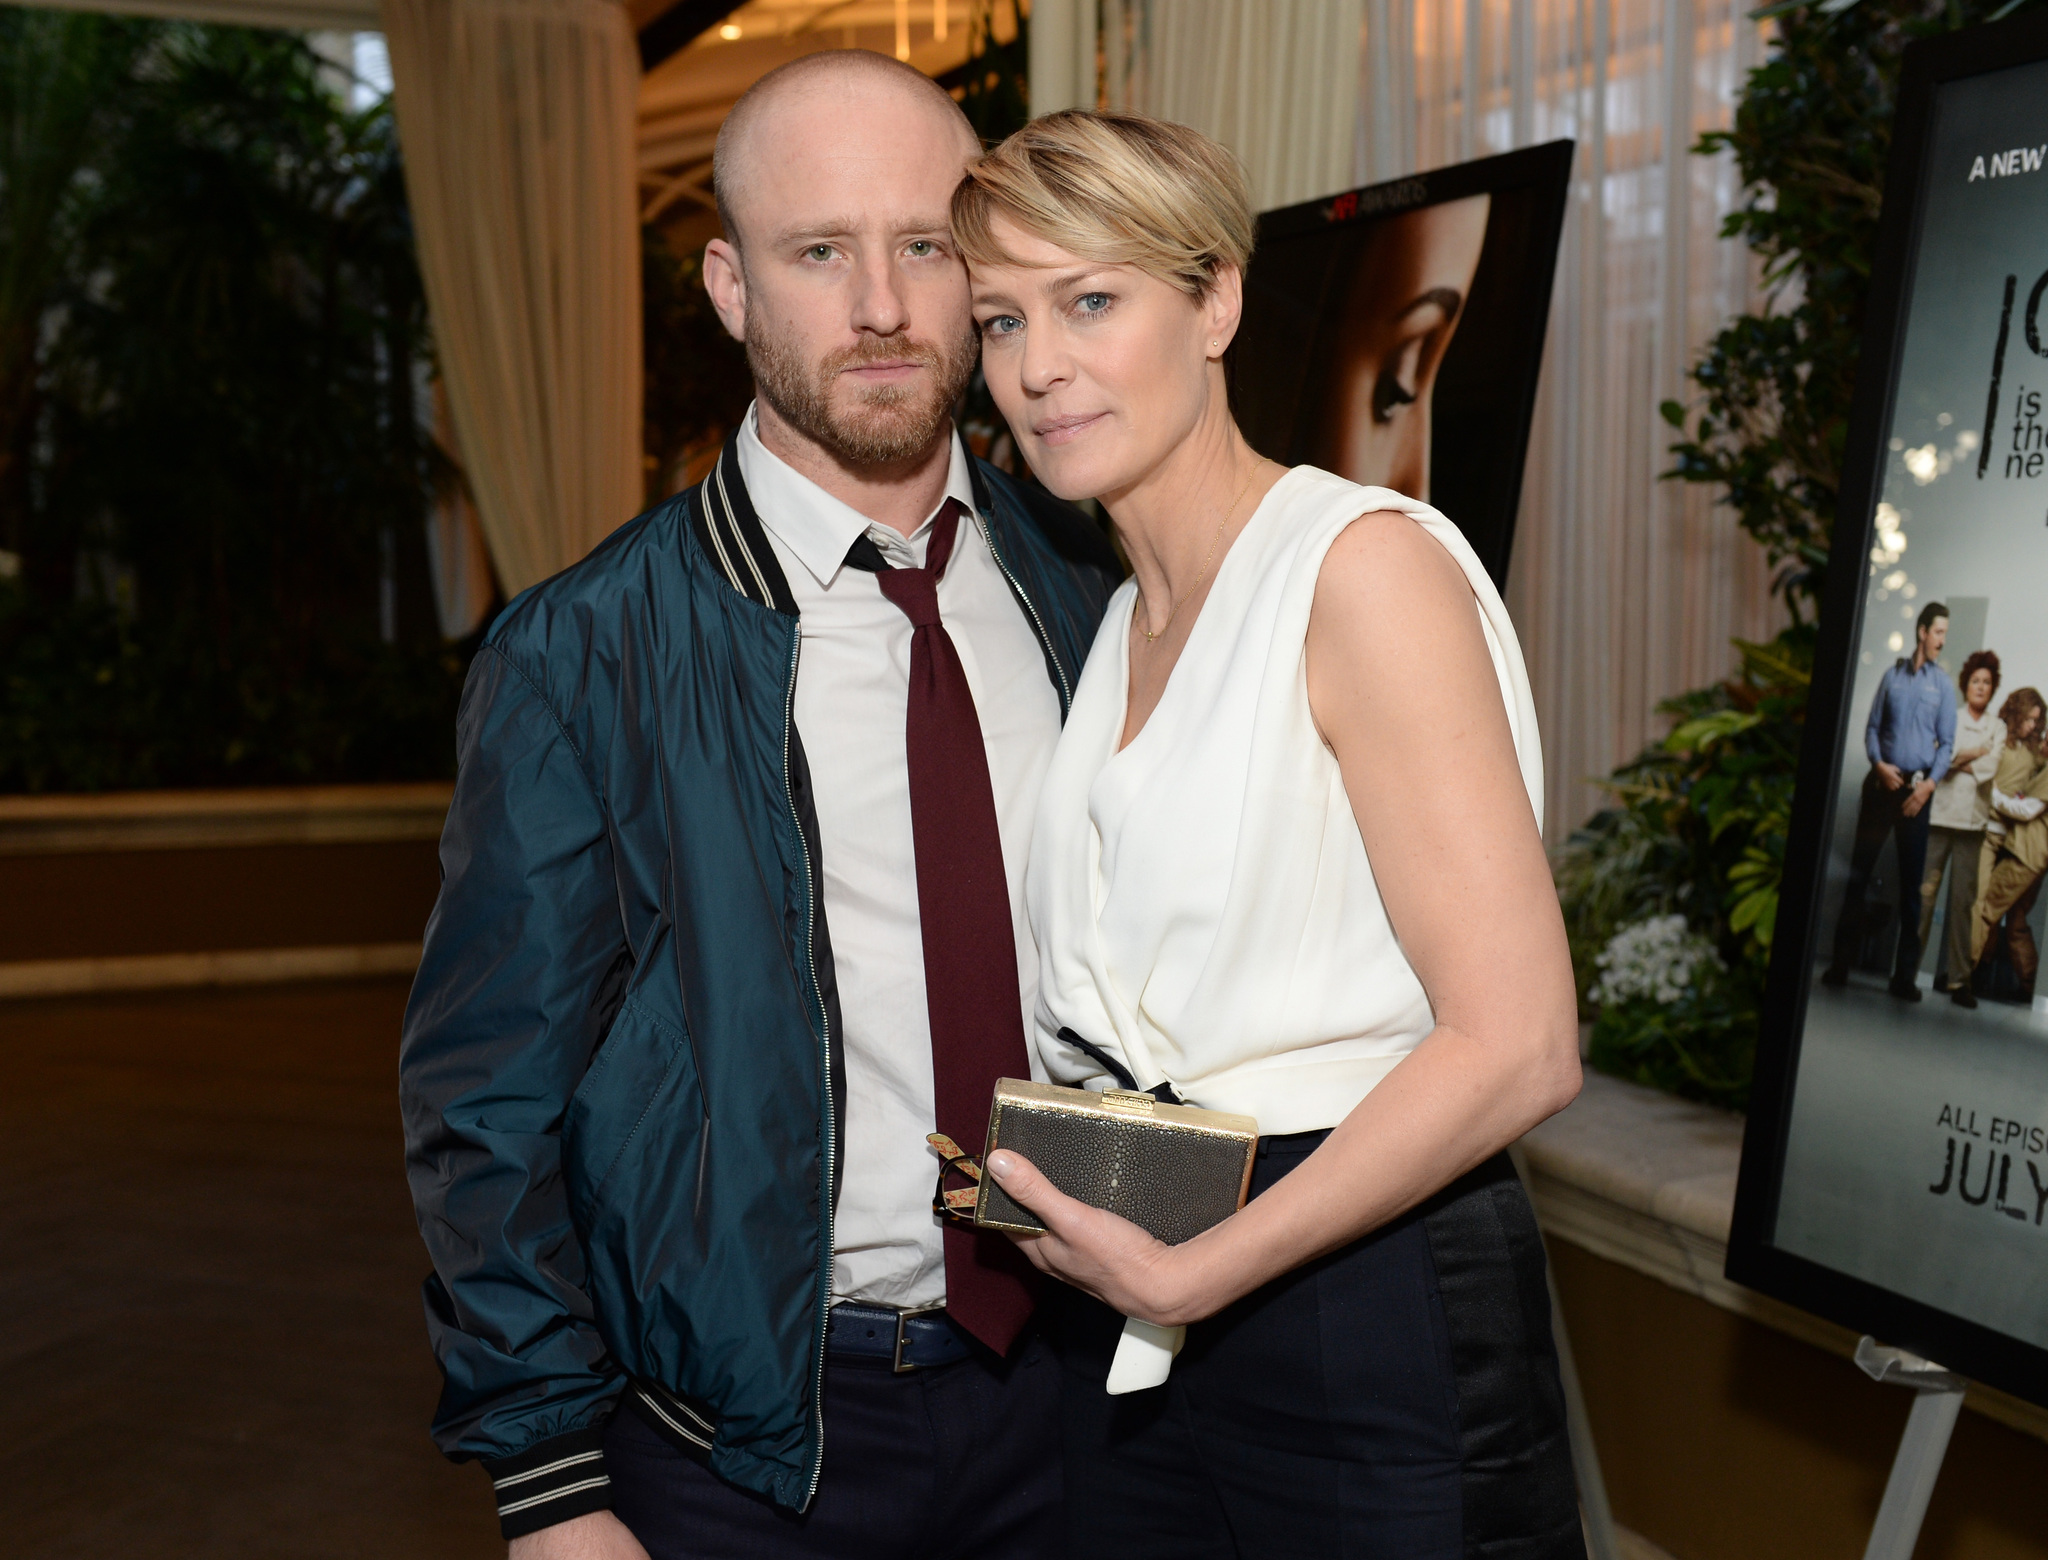 Robin Wright and Ben Foster